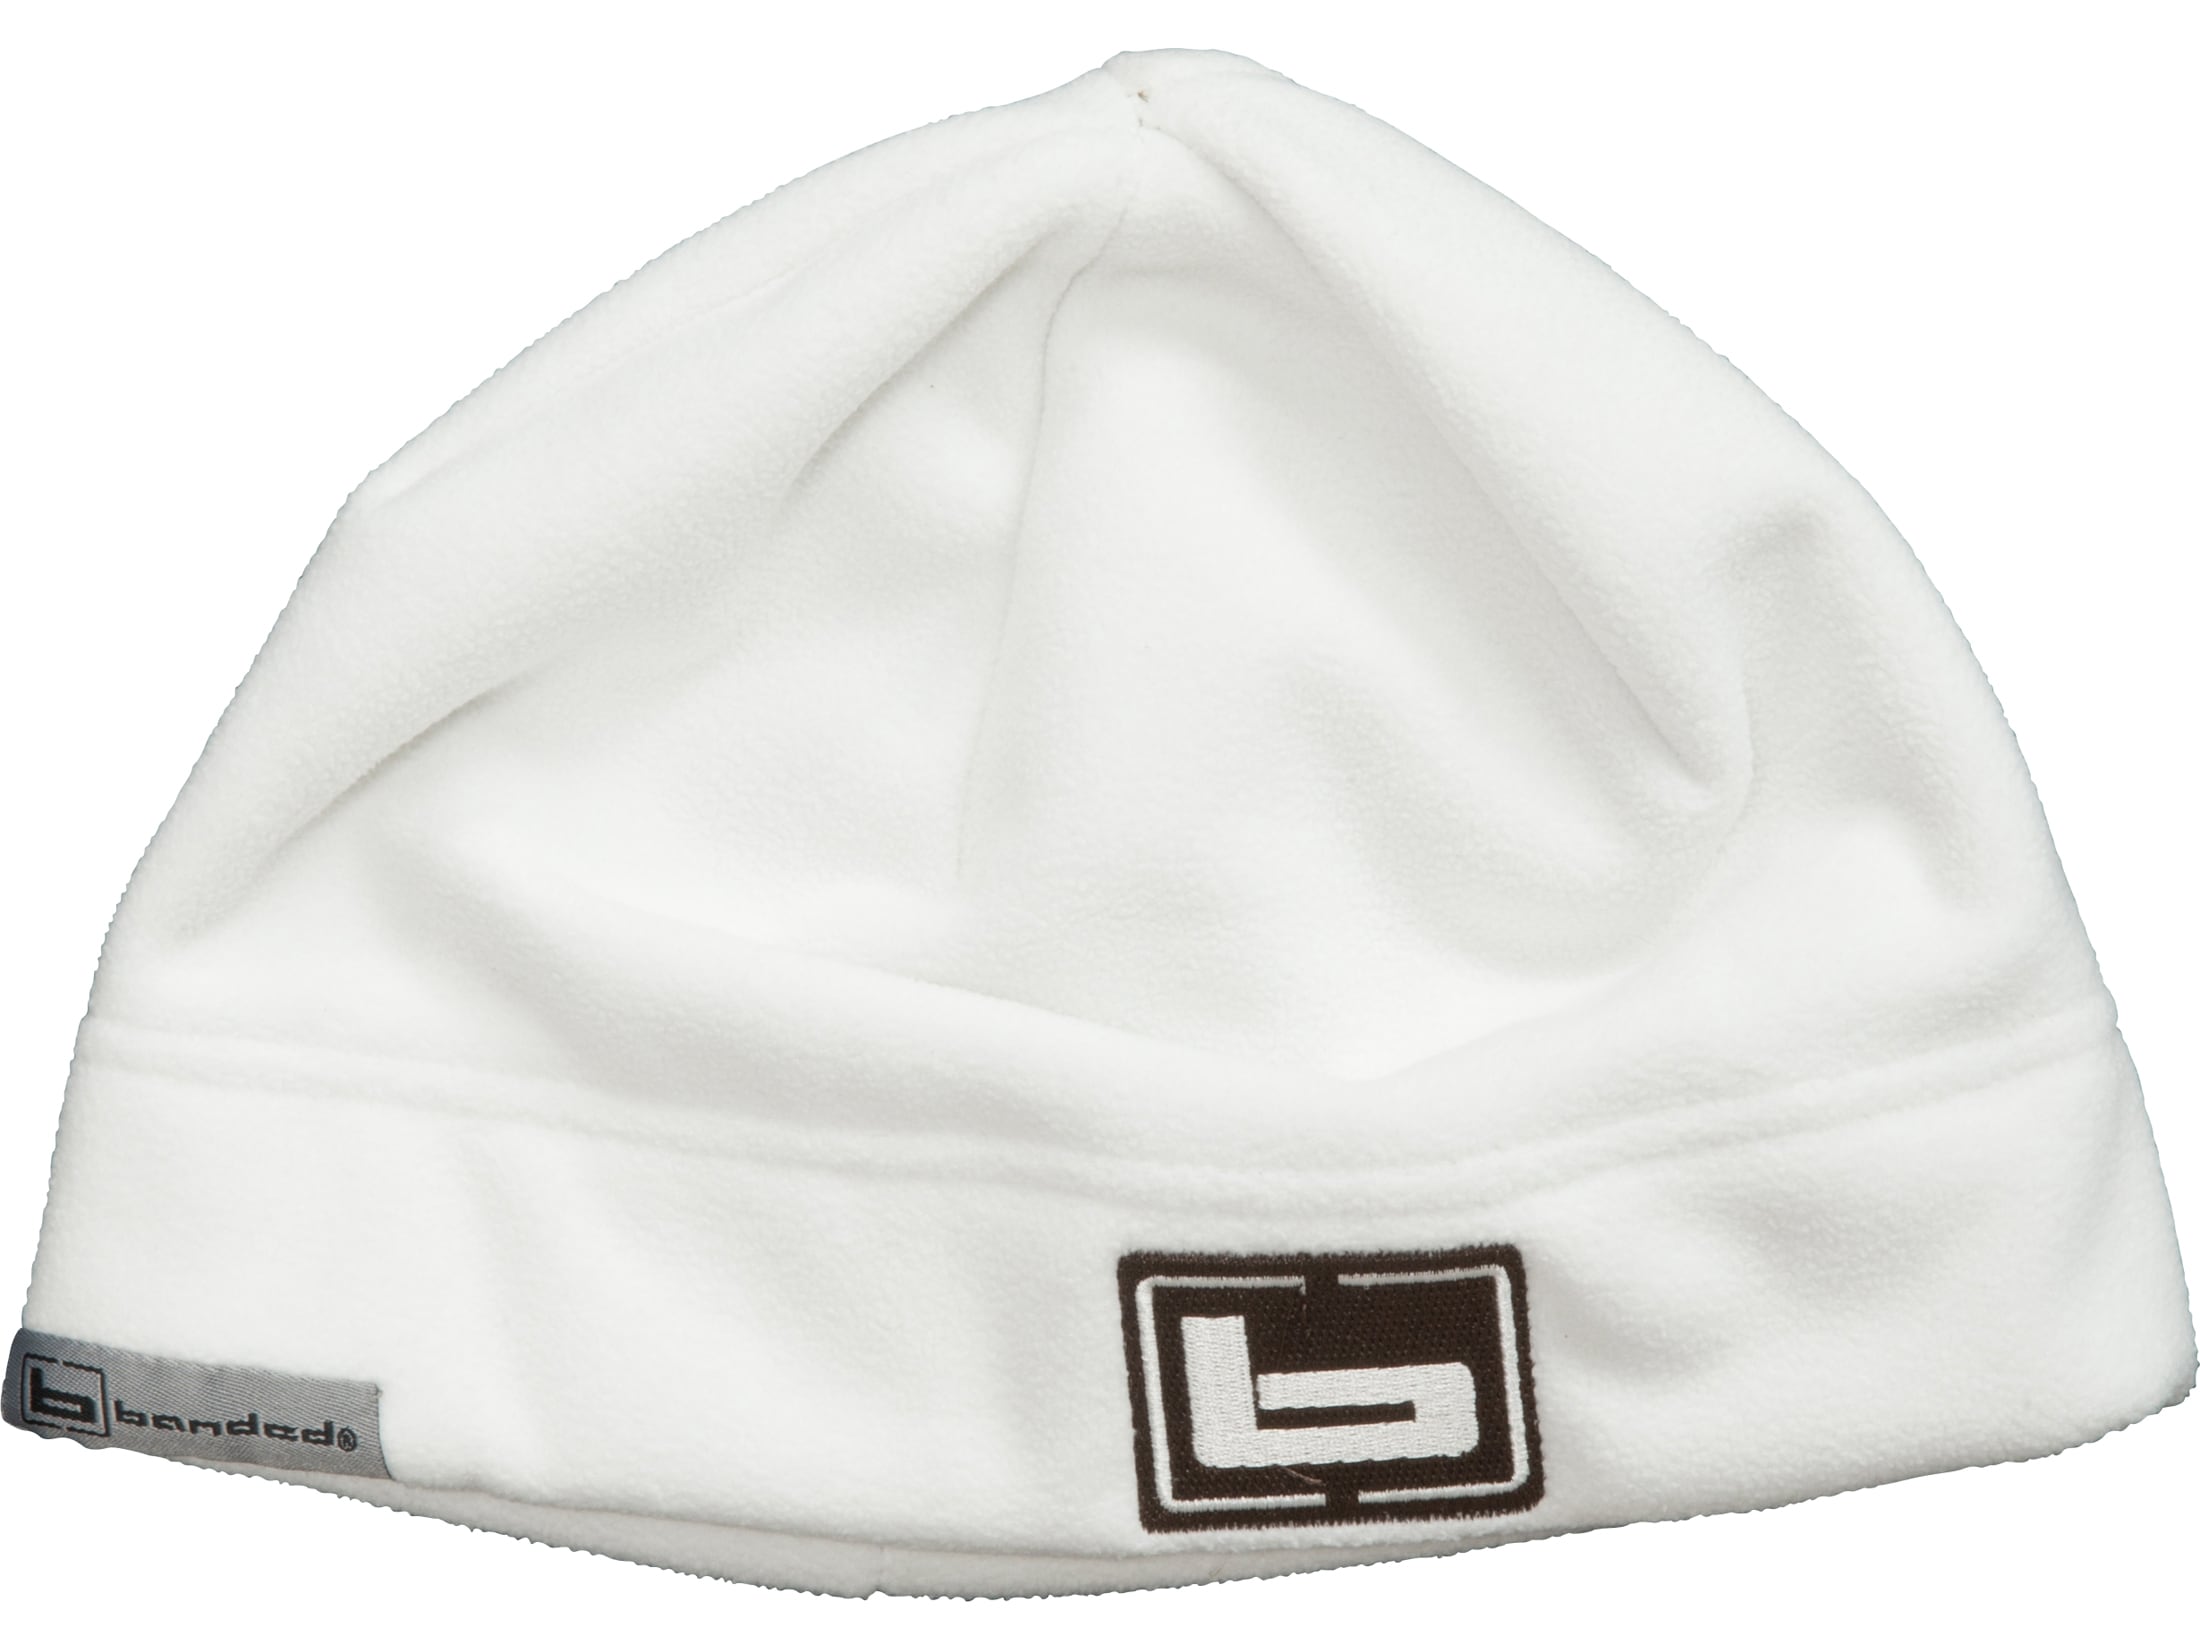 Banded Fleece Beanie White One Size Fits Most